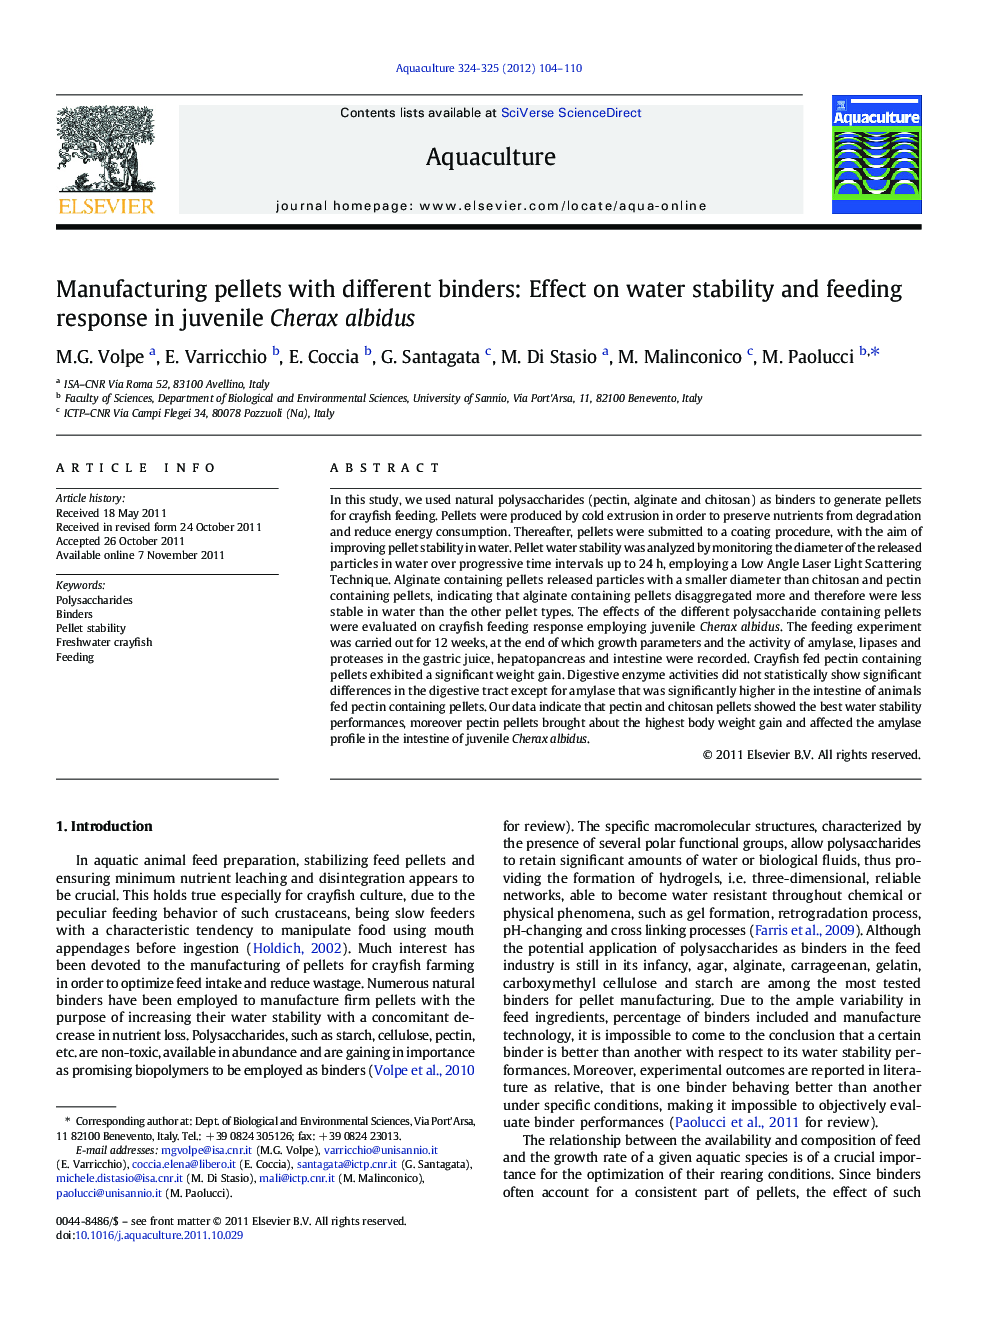 Manufacturing pellets with different binders: Effect on water stability and feeding response in juvenile Cherax albidus